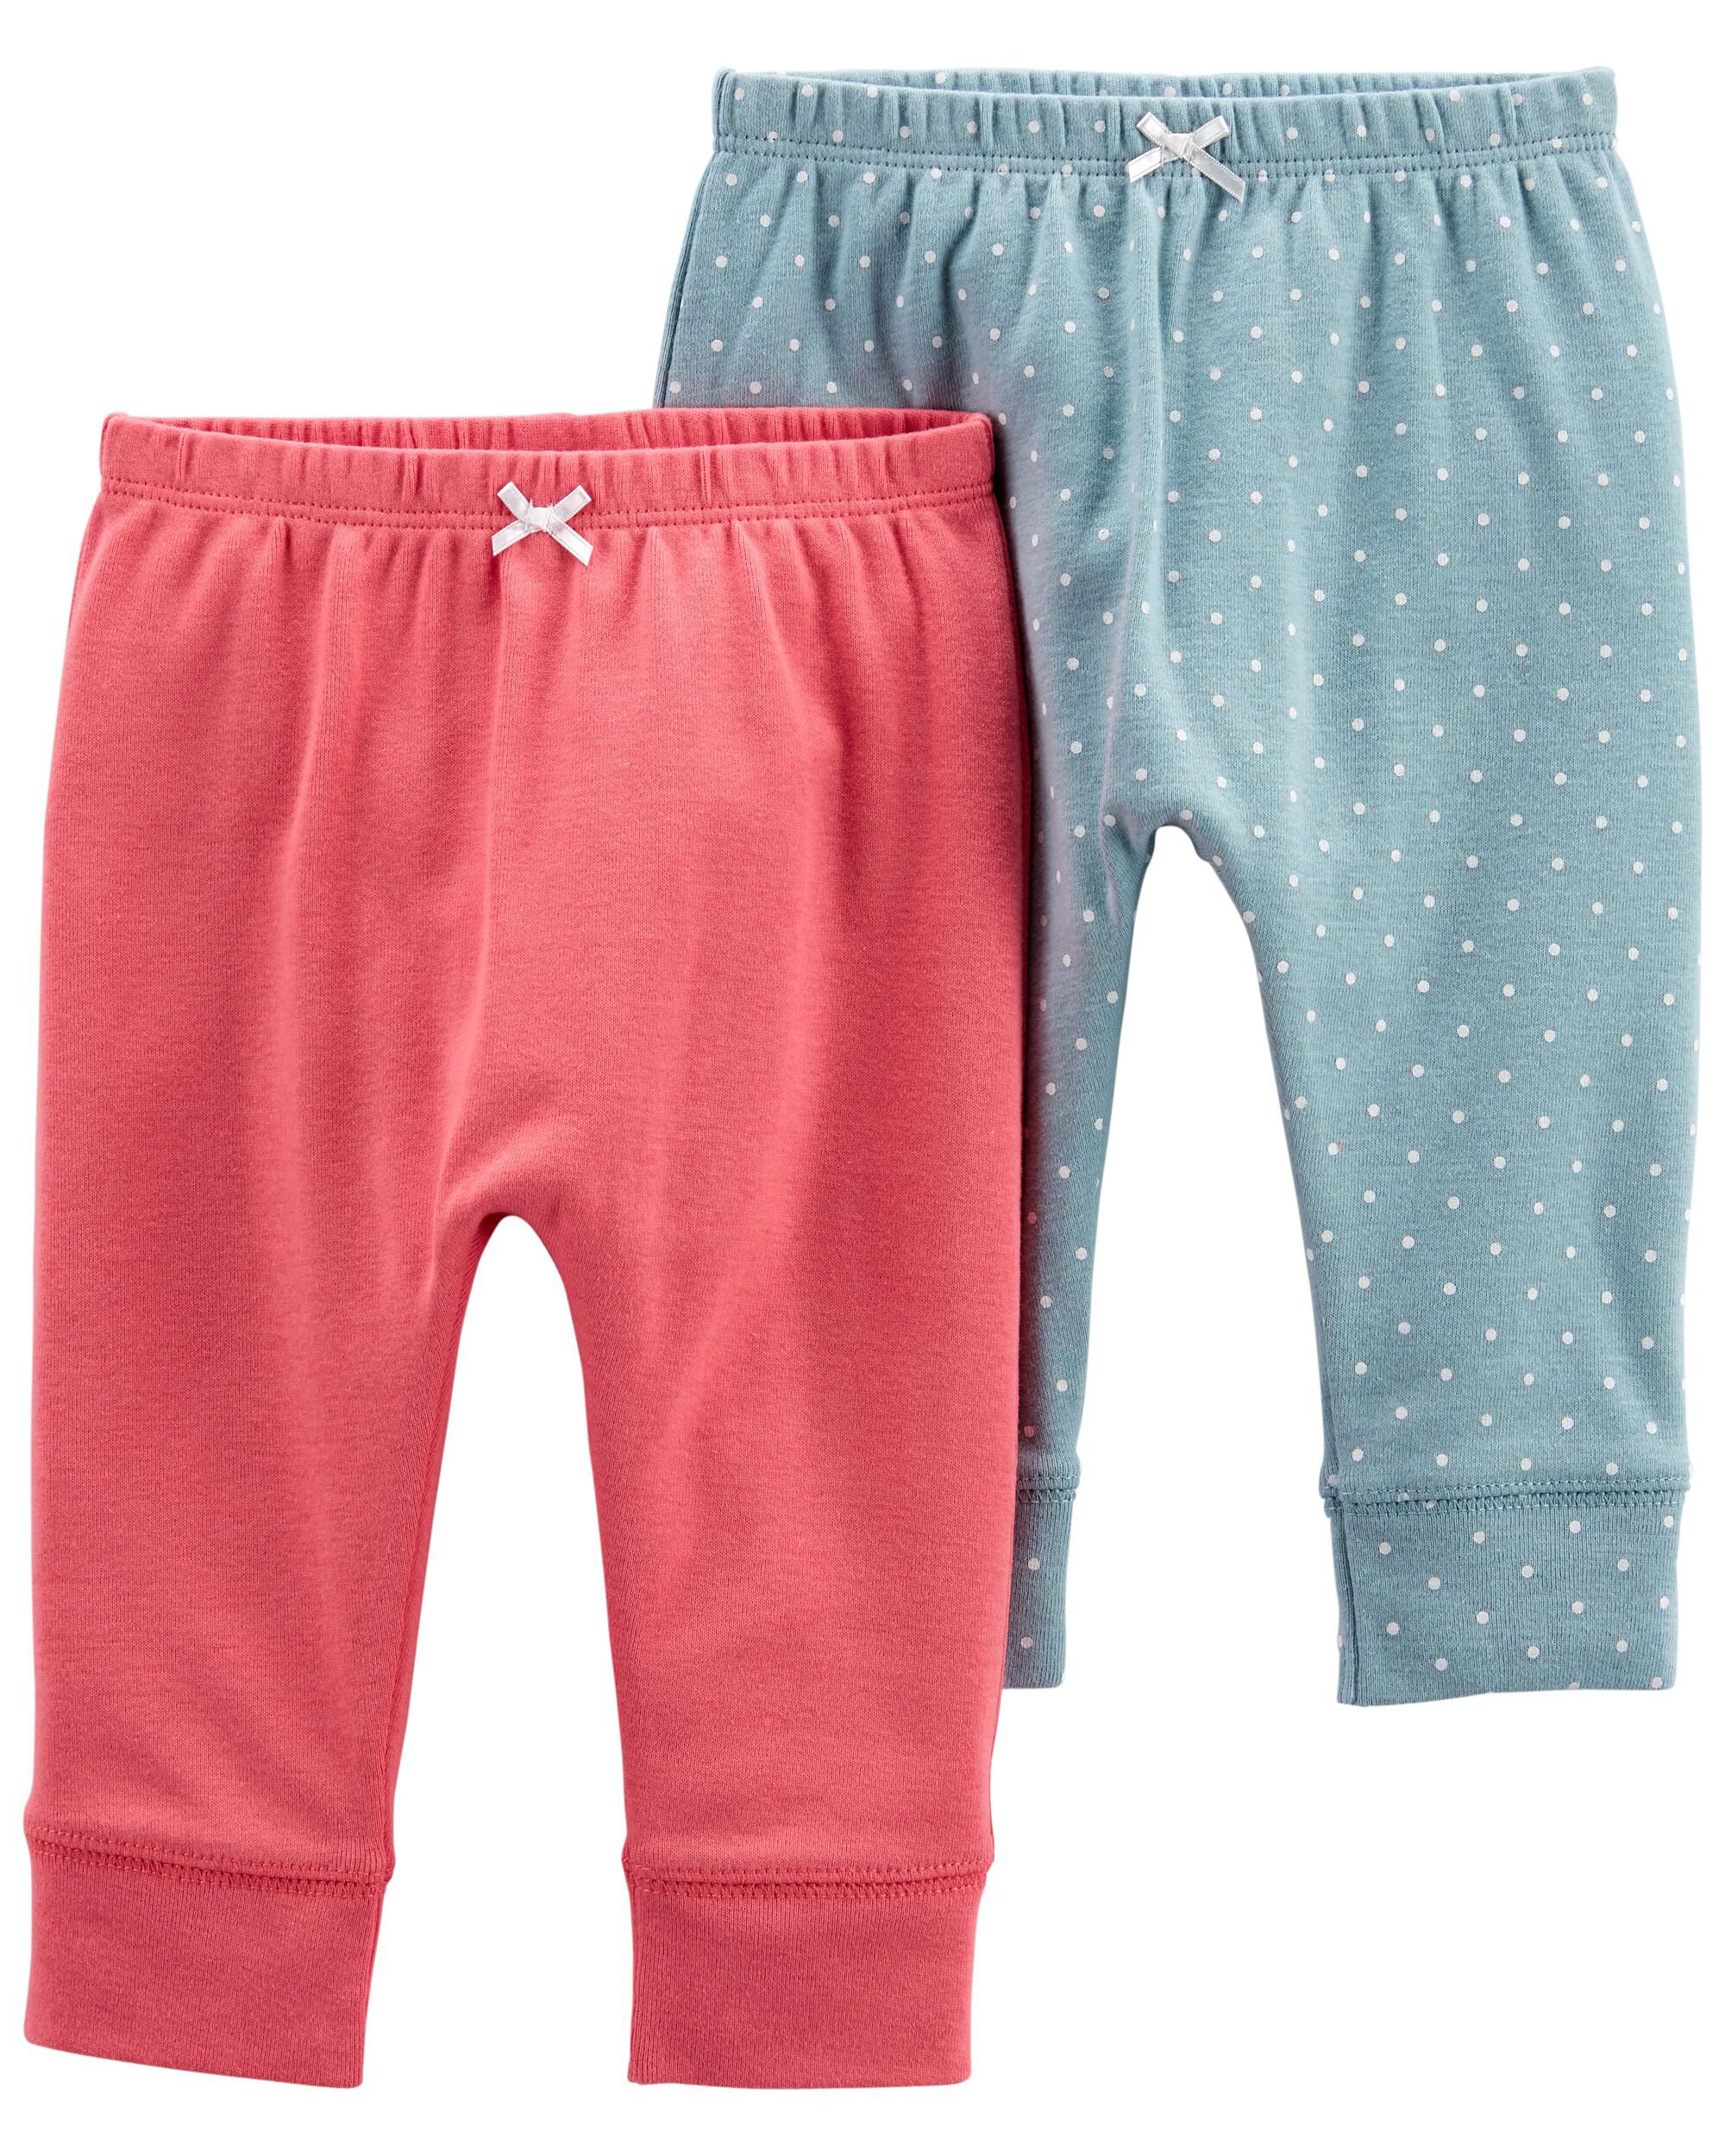 Details about   Carter’s Baby Girls’ 2-pack Pants Set 6M And 18M Sets Available 